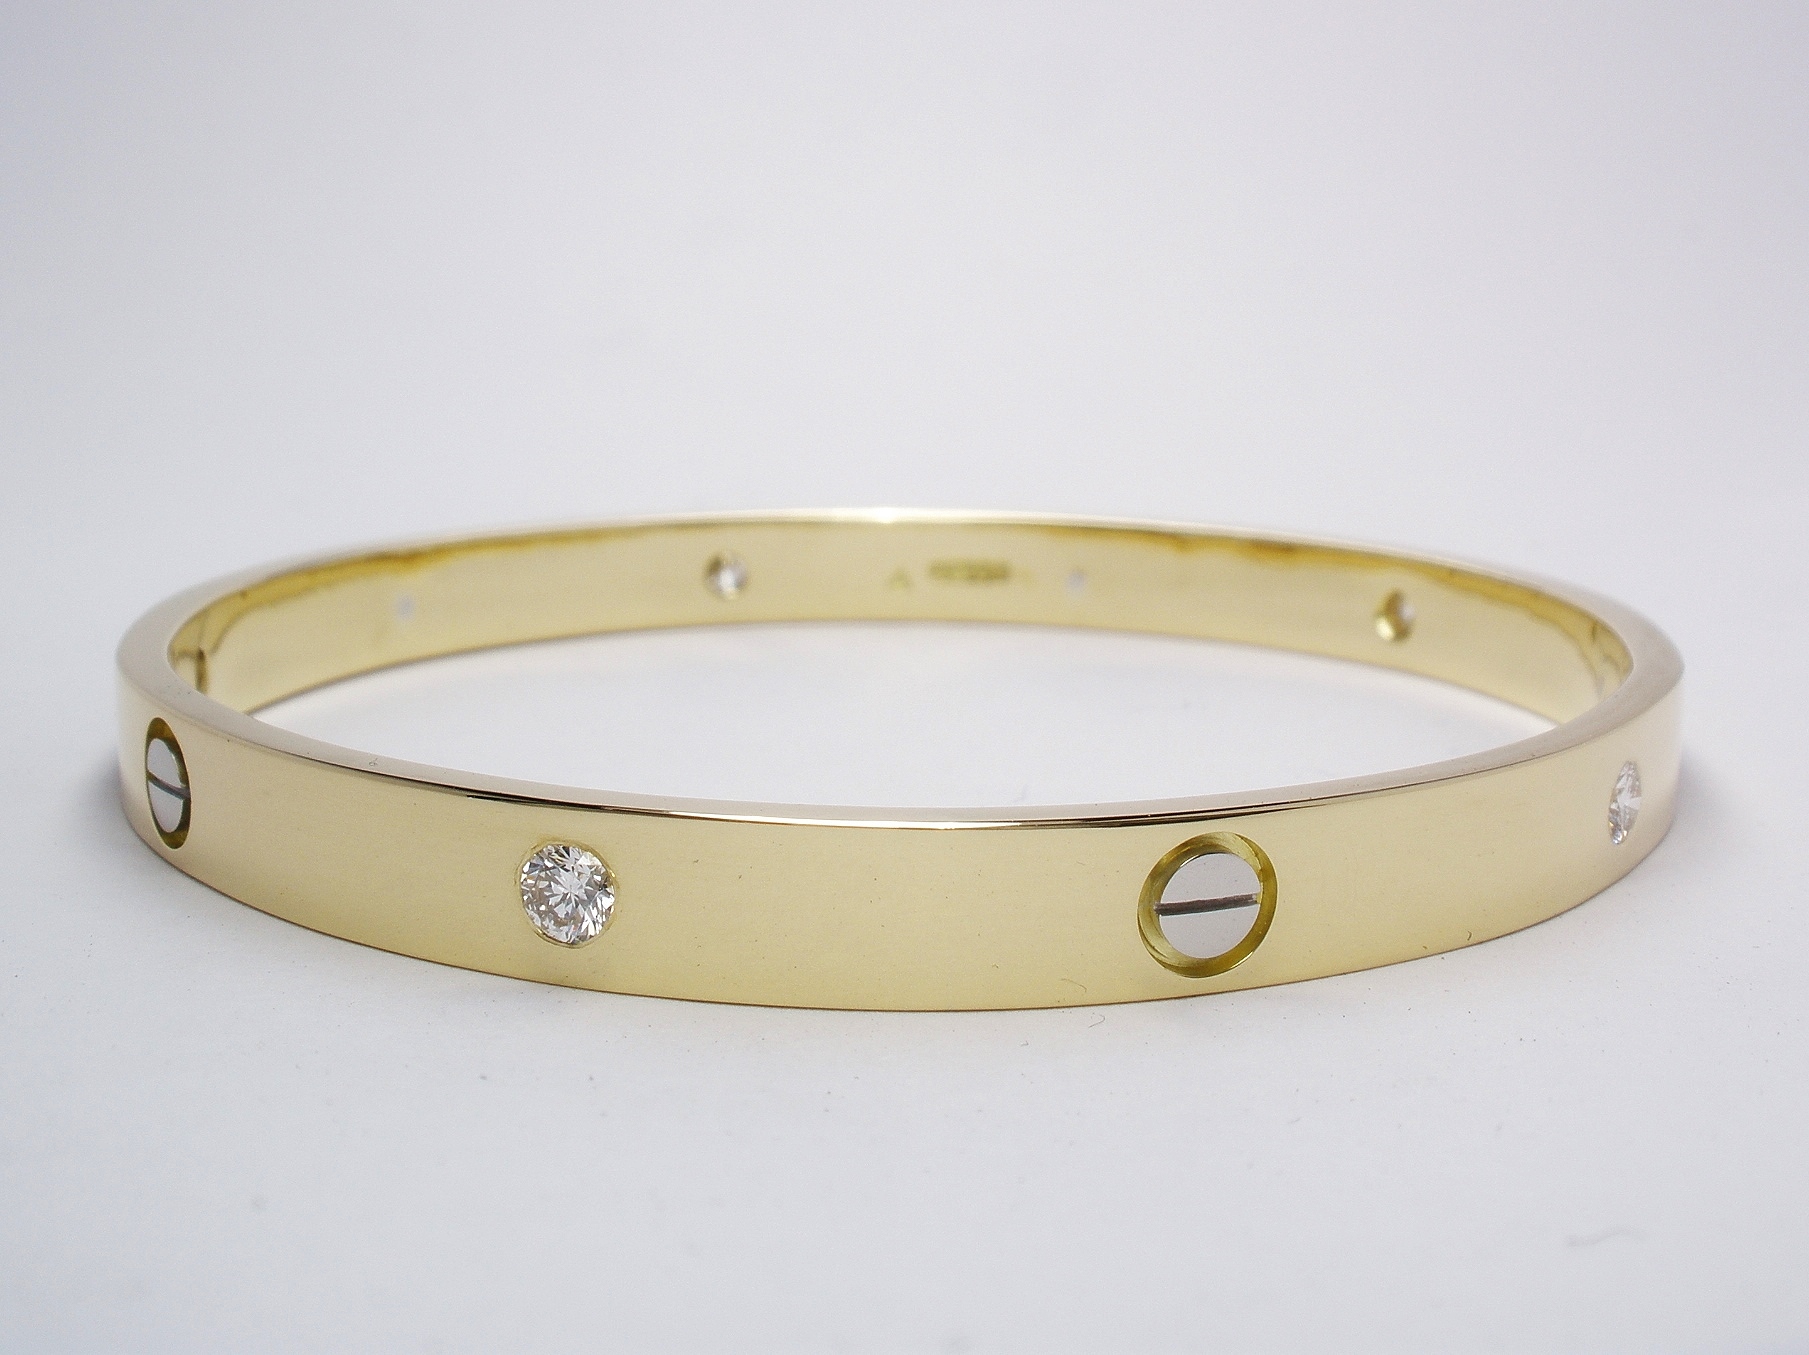 18ct. yellow gold solid bangle with 5 round brilliant cut diamonds flush set and 5 platinum screw heads inlayed.